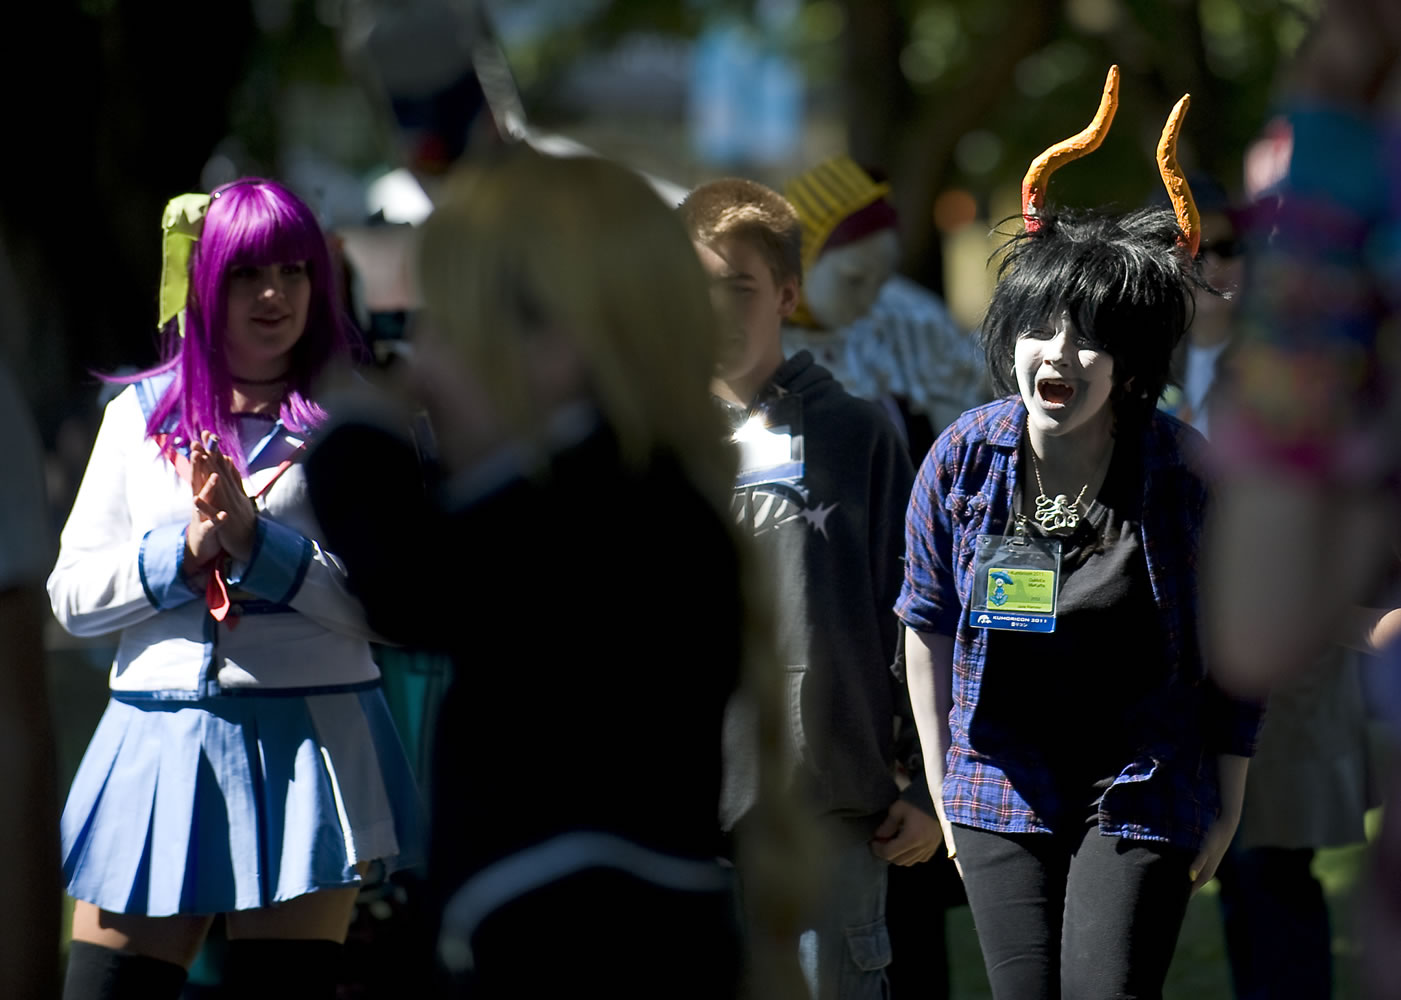 Jade Ramsey, right, 14, of Portland, who is dressed as MS Paint Adventures character &quot;Gamzee Makara&quot; gathers with other Kumoricon 2011 participants at Esther Short Park last September.